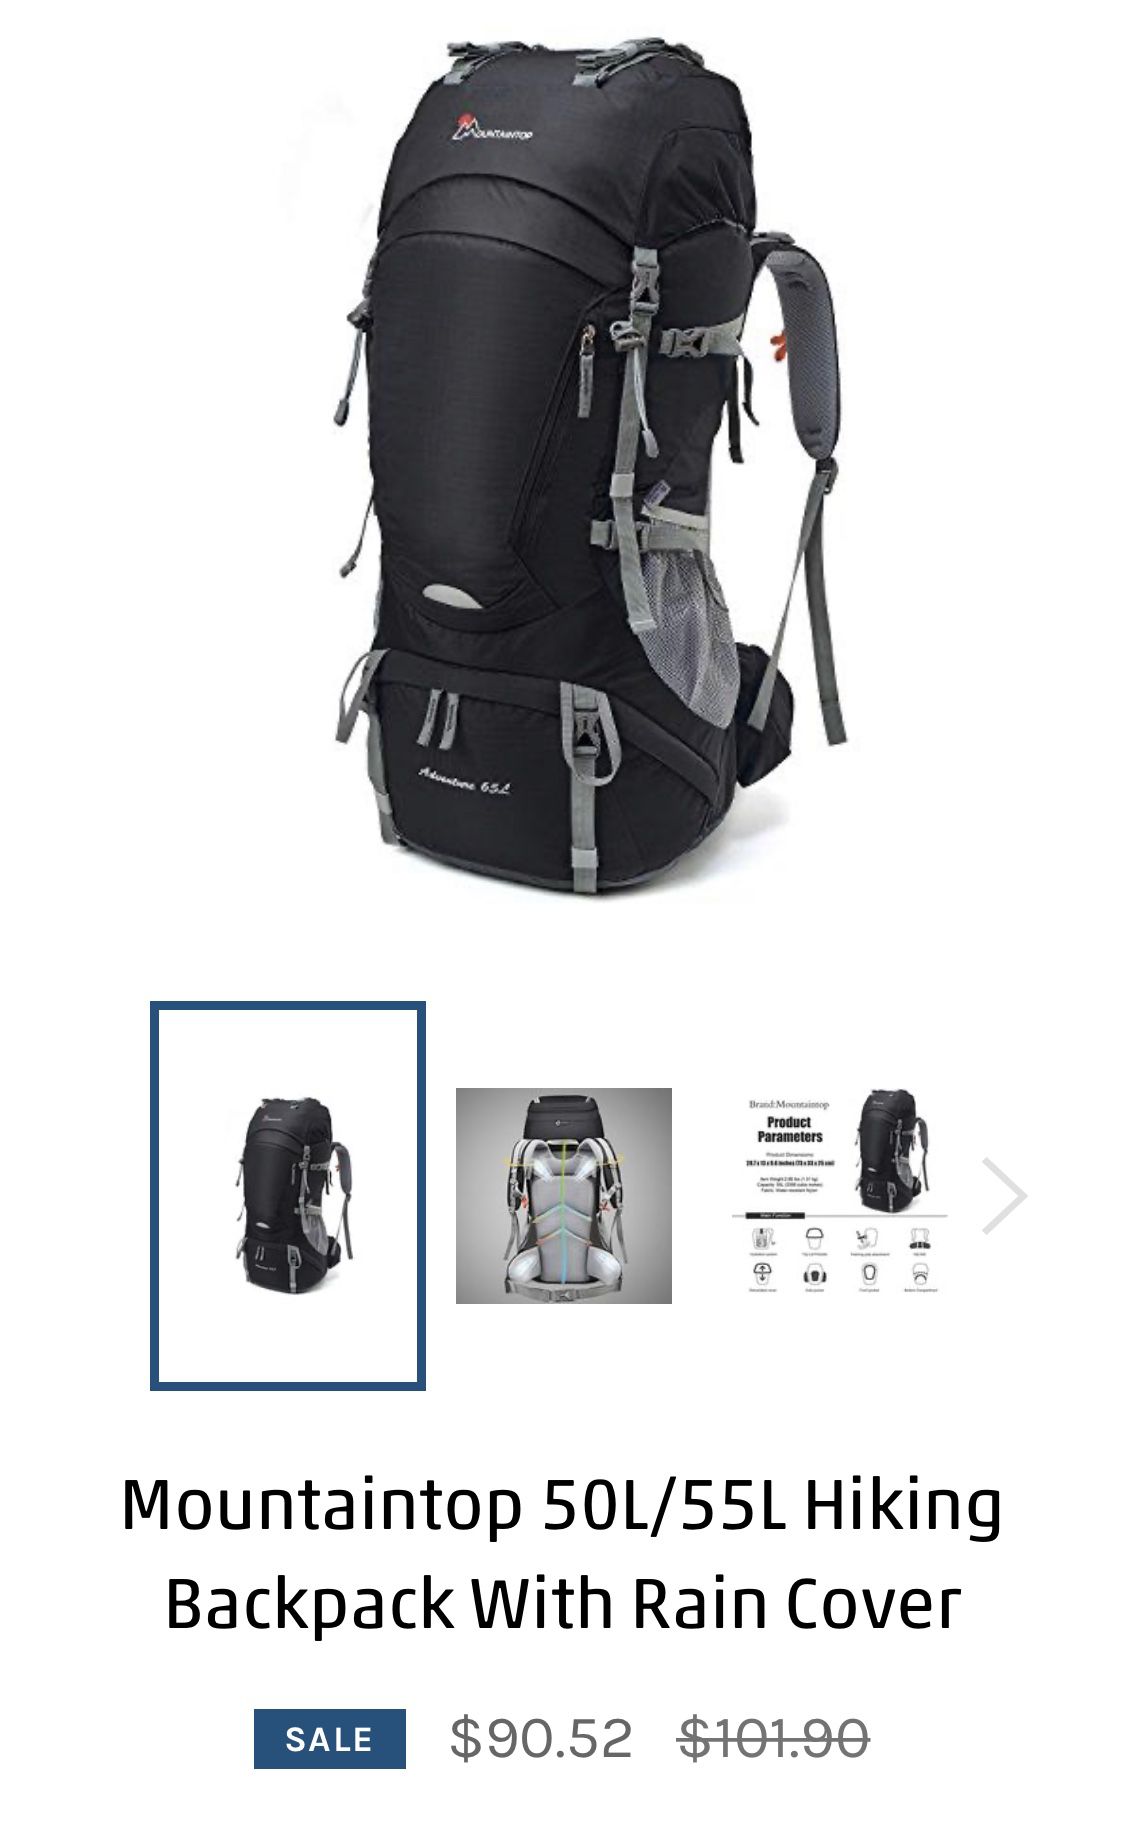 Hiking Backpack 55l - Available in two colors black and blue